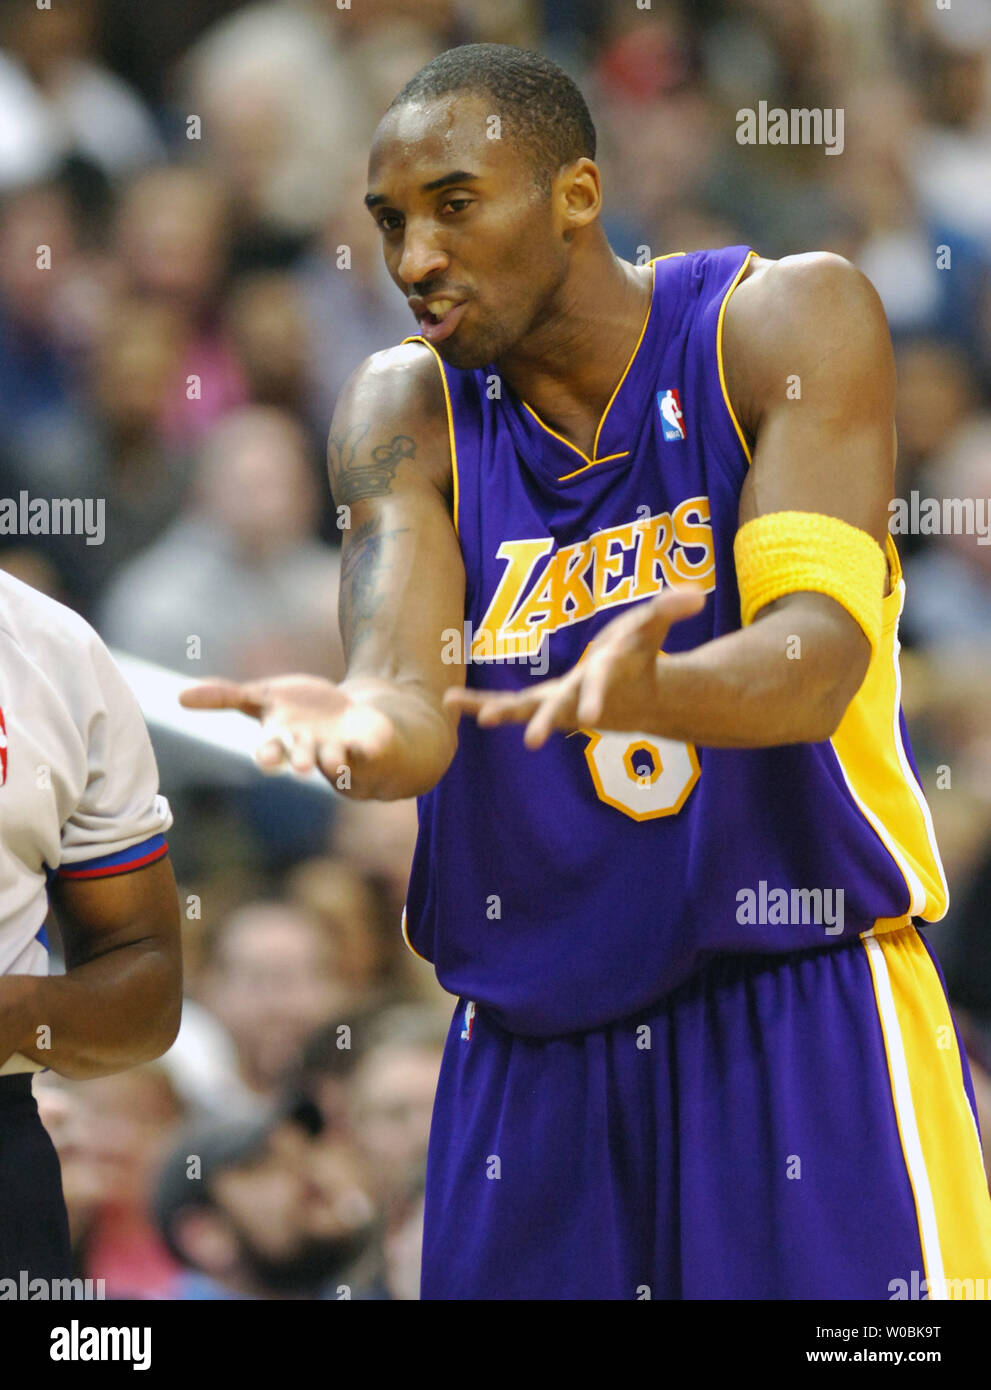 Kobe Bryant (8) of the Los Angeles Lakers disagrees with a foul call against the Washington Wizards on December 26, 2005 in the third quarter at the MCI Center in  Washington, D.C.  The Wizards defeated the Lakers 94-91.   (UPI Photo/Mark Goldman) Stock Photo